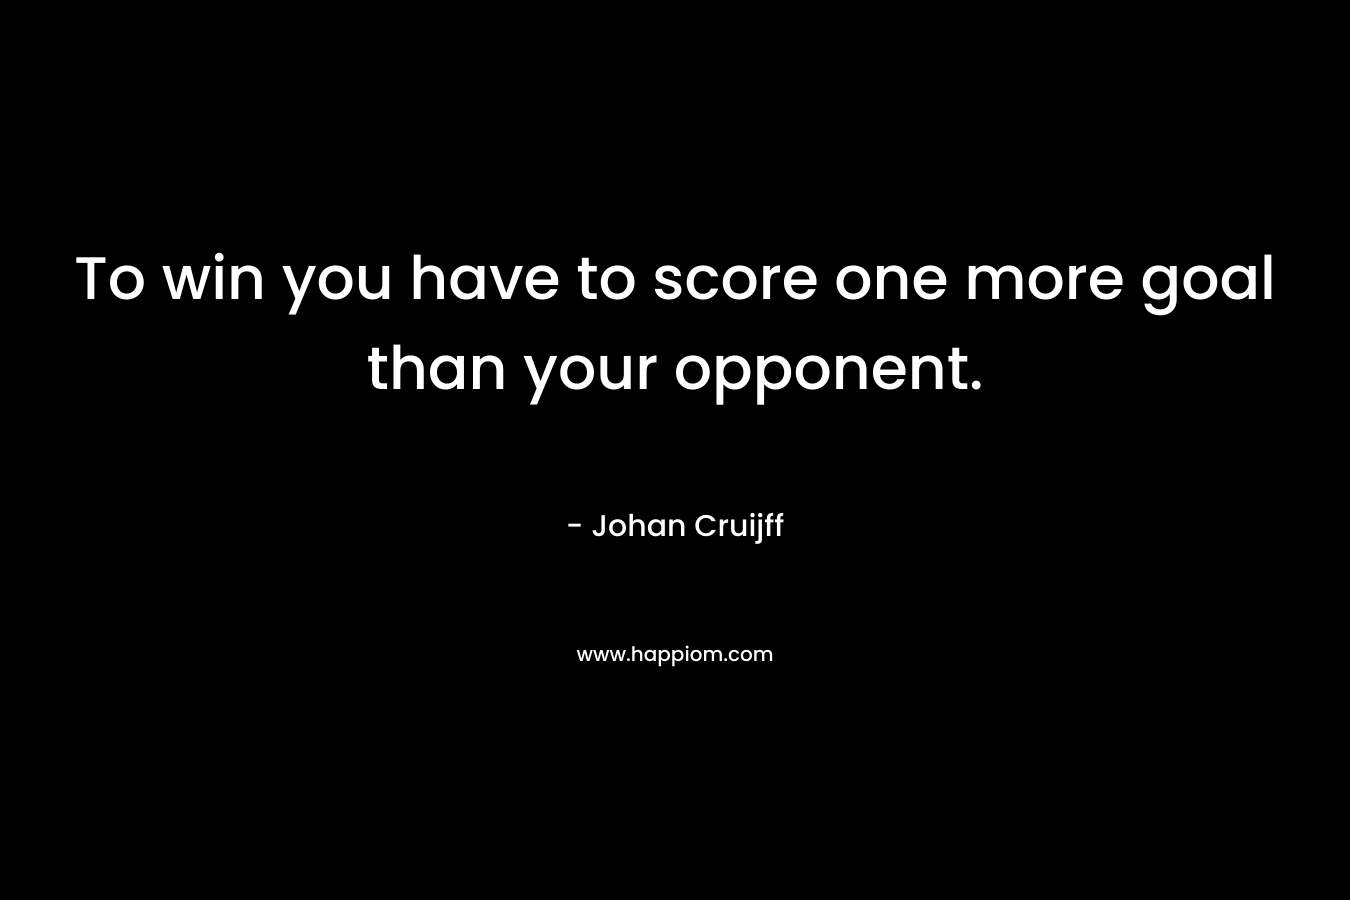 To win you have to score one more goal than your opponent. – Johan Cruijff